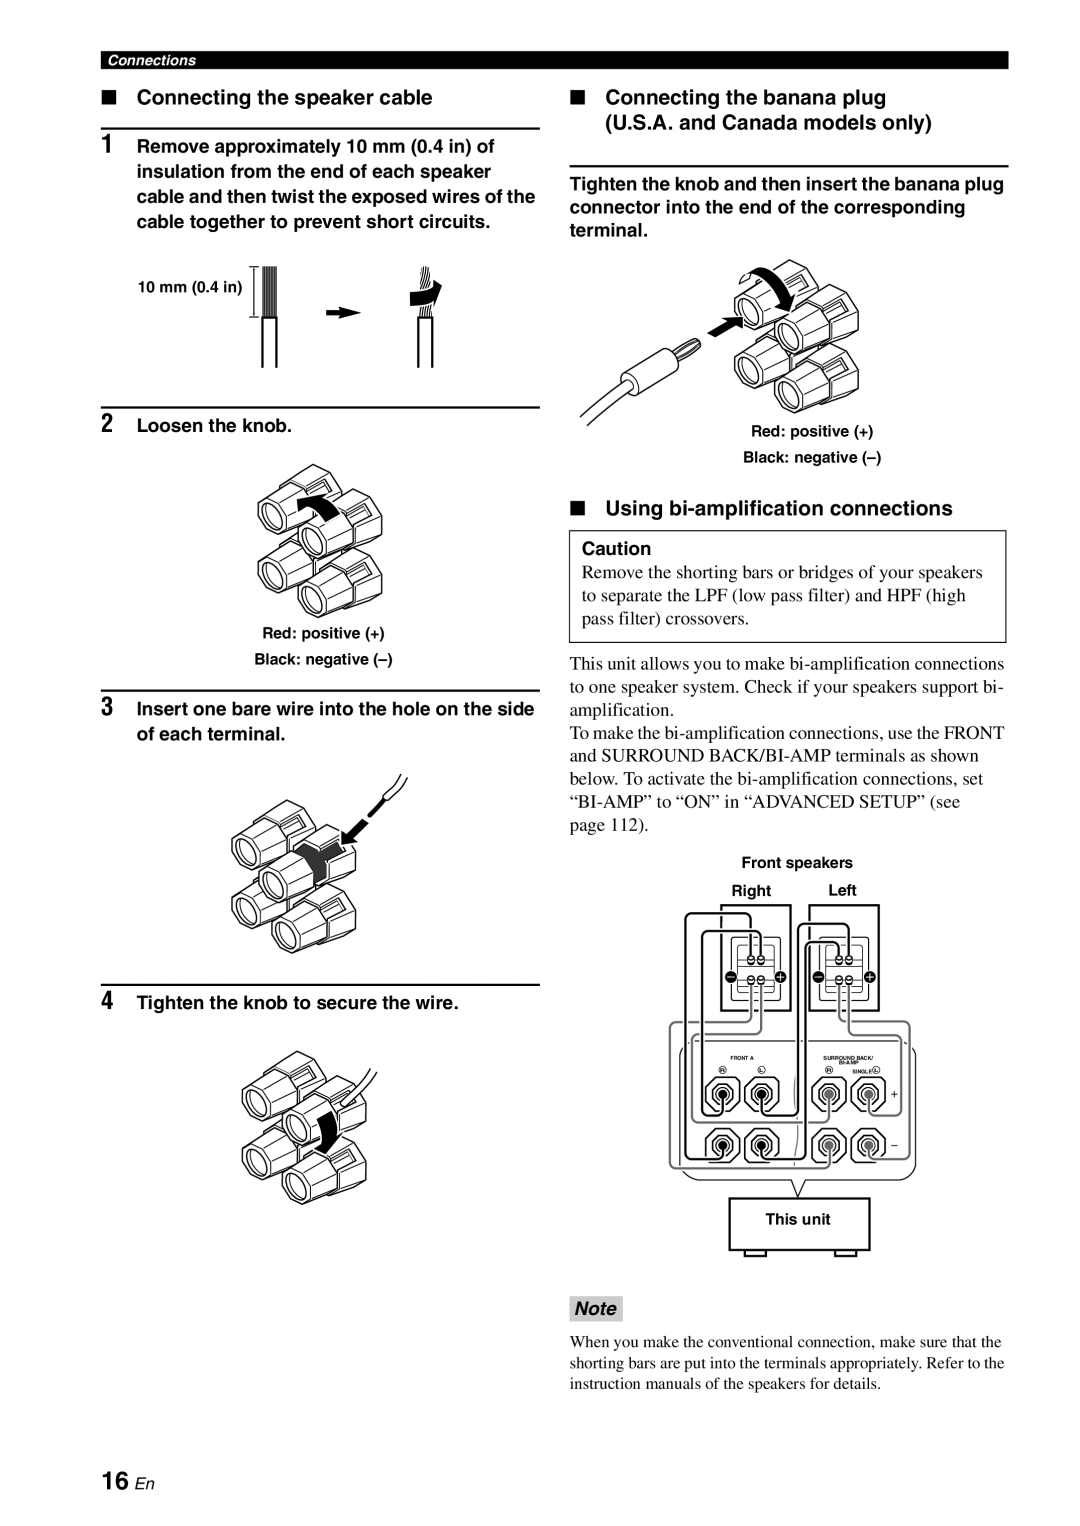 Yamaha HTR-6180 owner manual 16 En, Connecting the speaker cable, Using bi-amplificationconnections 